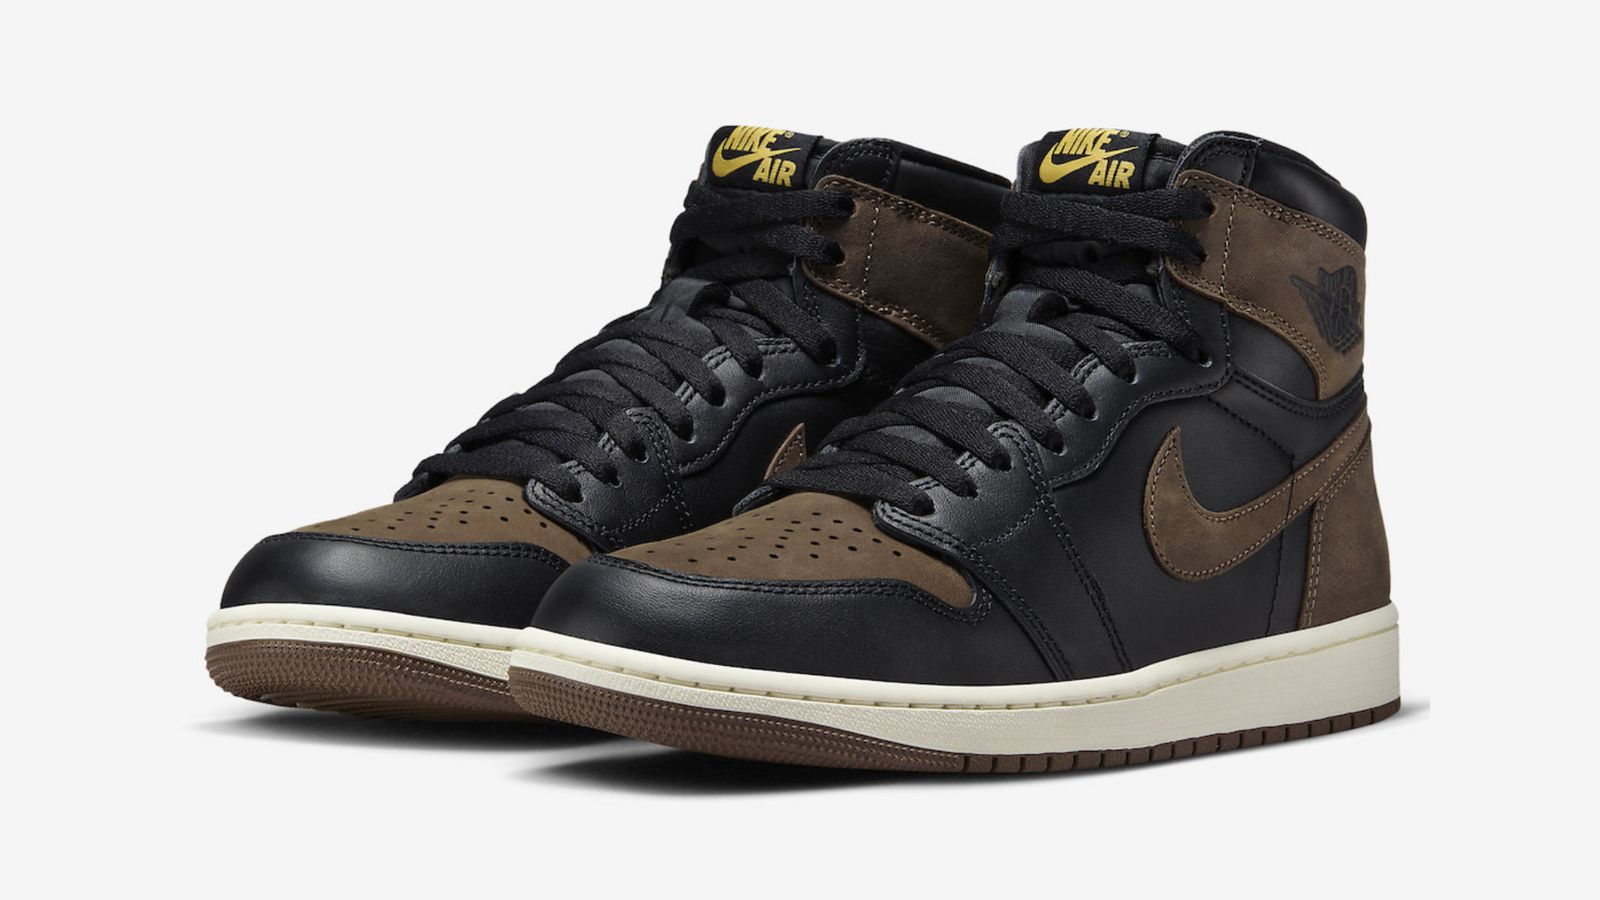 Air Jordan 1 High "Palomino" product image of a pair of black leather and brown nubuck high-tops with off-white midsoles.